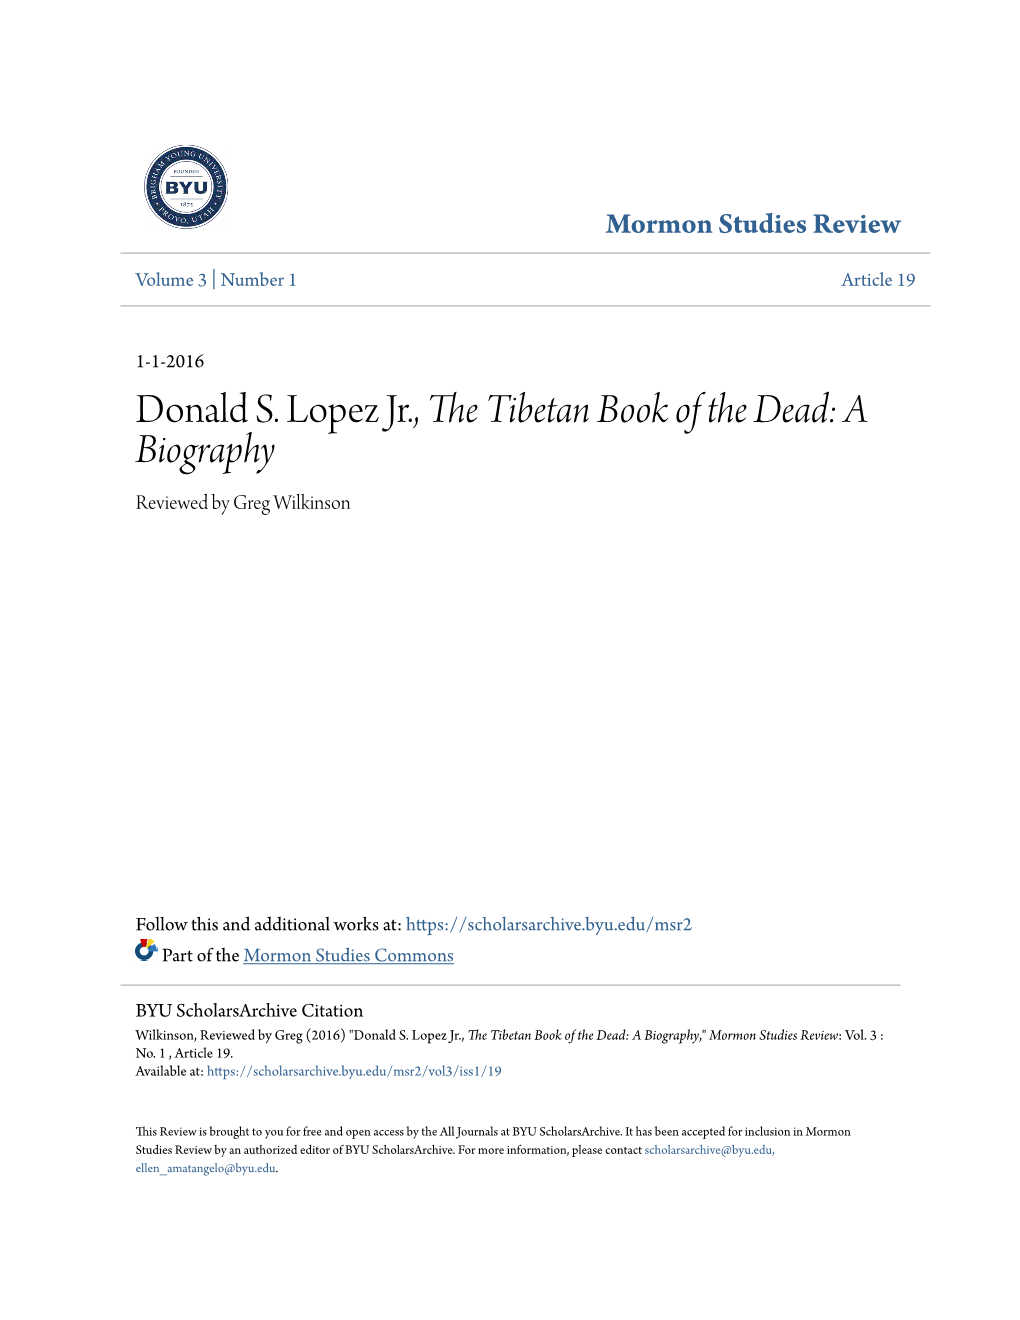 Donald S. Lopez Jr., the Tibetan Book of the Dead: a Biography Reviewed by Greg Wilkinson